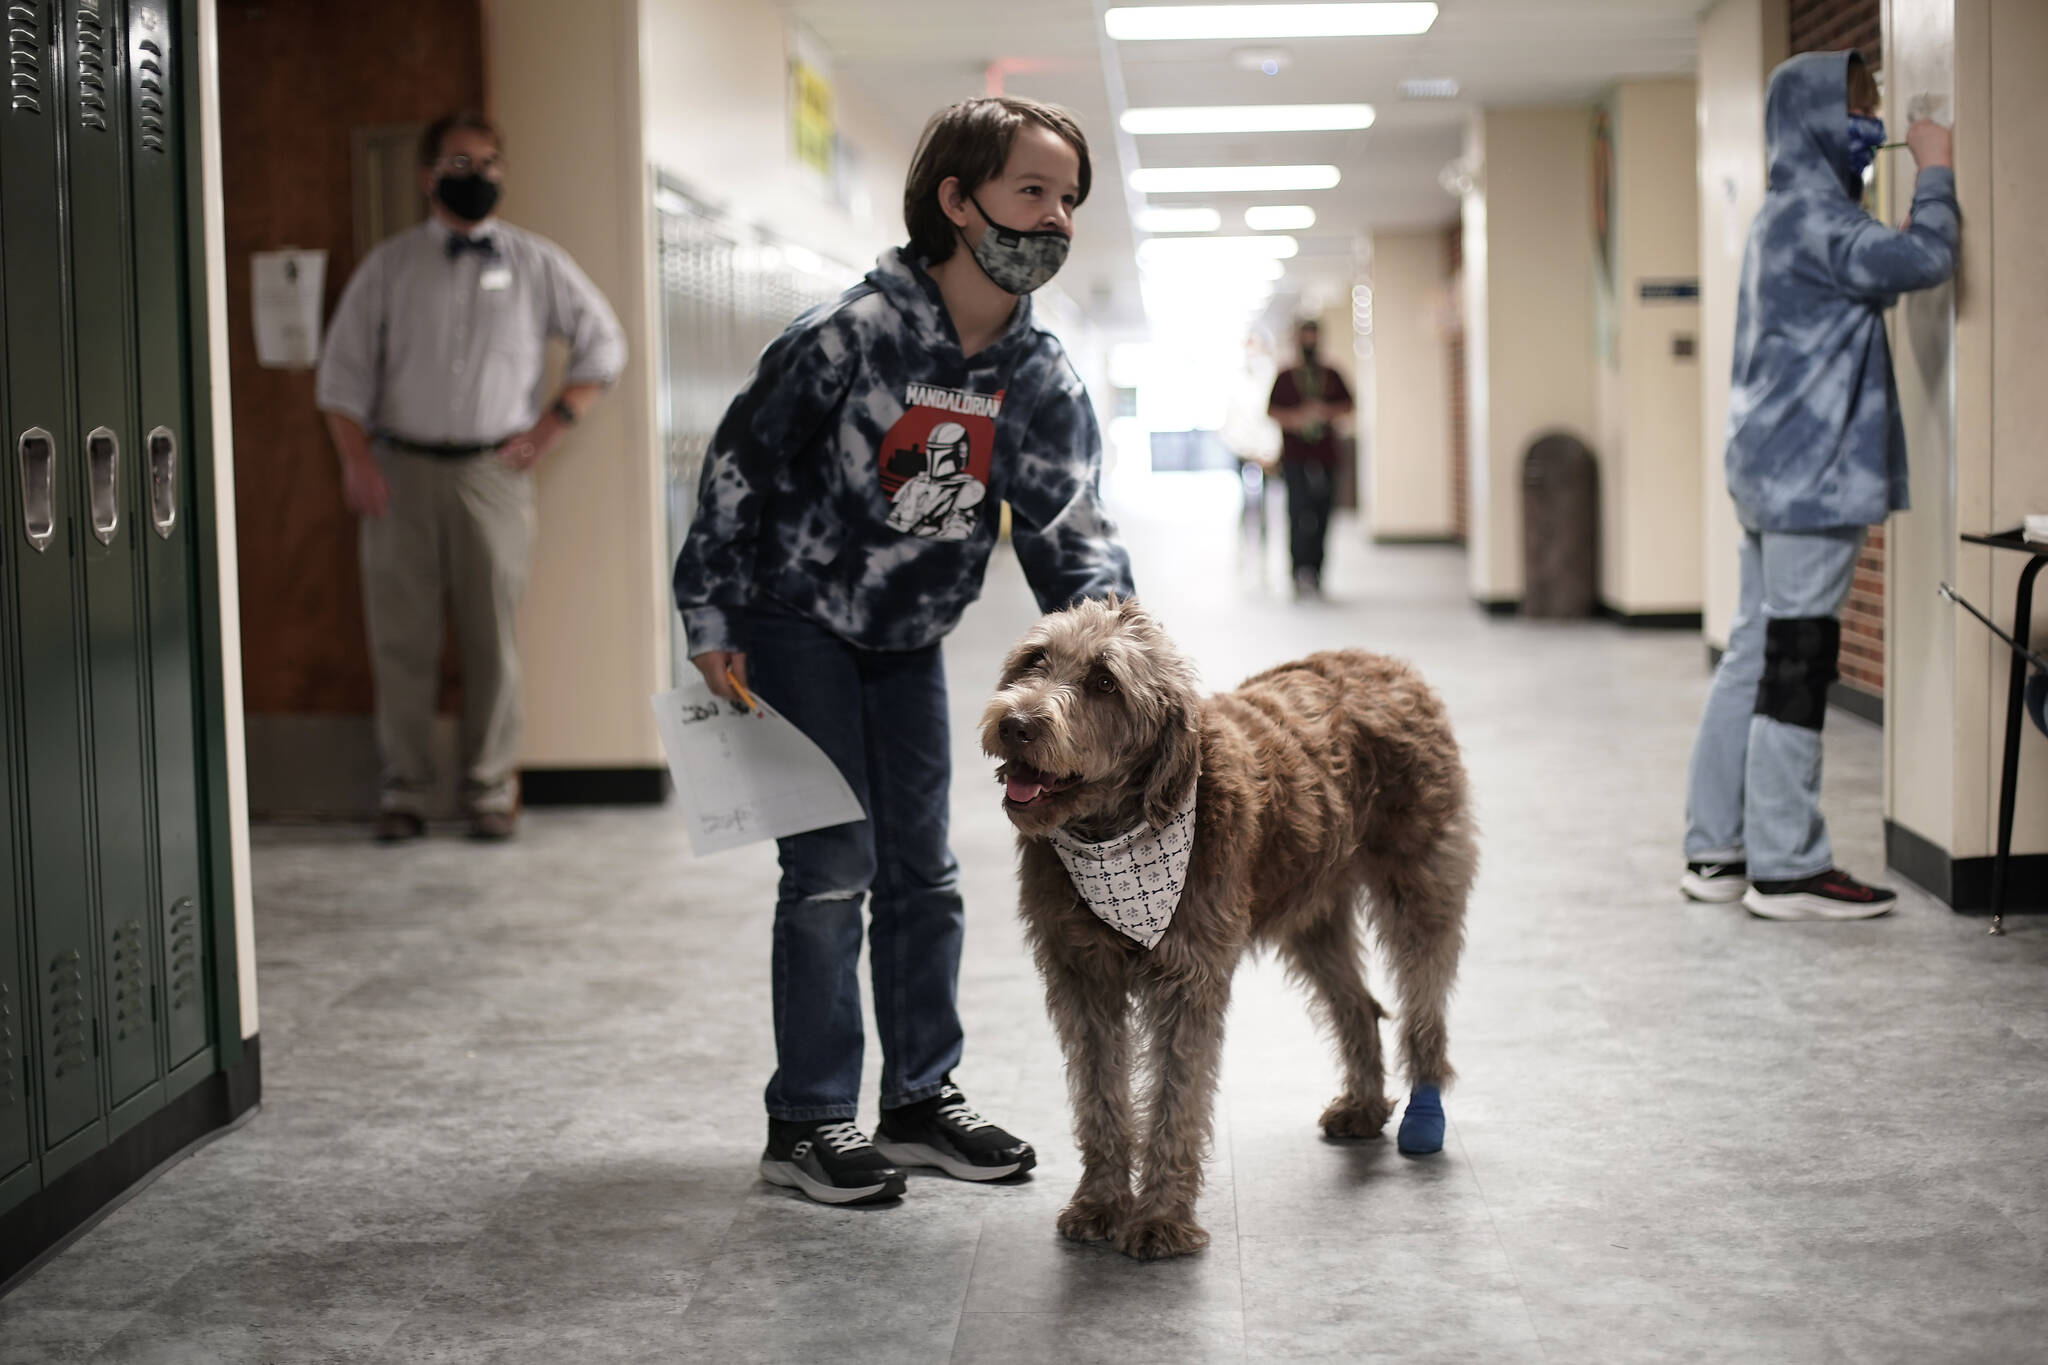 AP Photo/Charlie Riedel
A student pets Wilson, a therapy dog, in a hallway at French Middle School, Wednesday, Nov. 3, 2021, in Topeka, Kan. The dog is one of the tools designed to relieve stresses faced by students as they return to classrooms amid the ongoing pandemic. State health officials say nationwide trends in mental health issues are worse in Alaska.